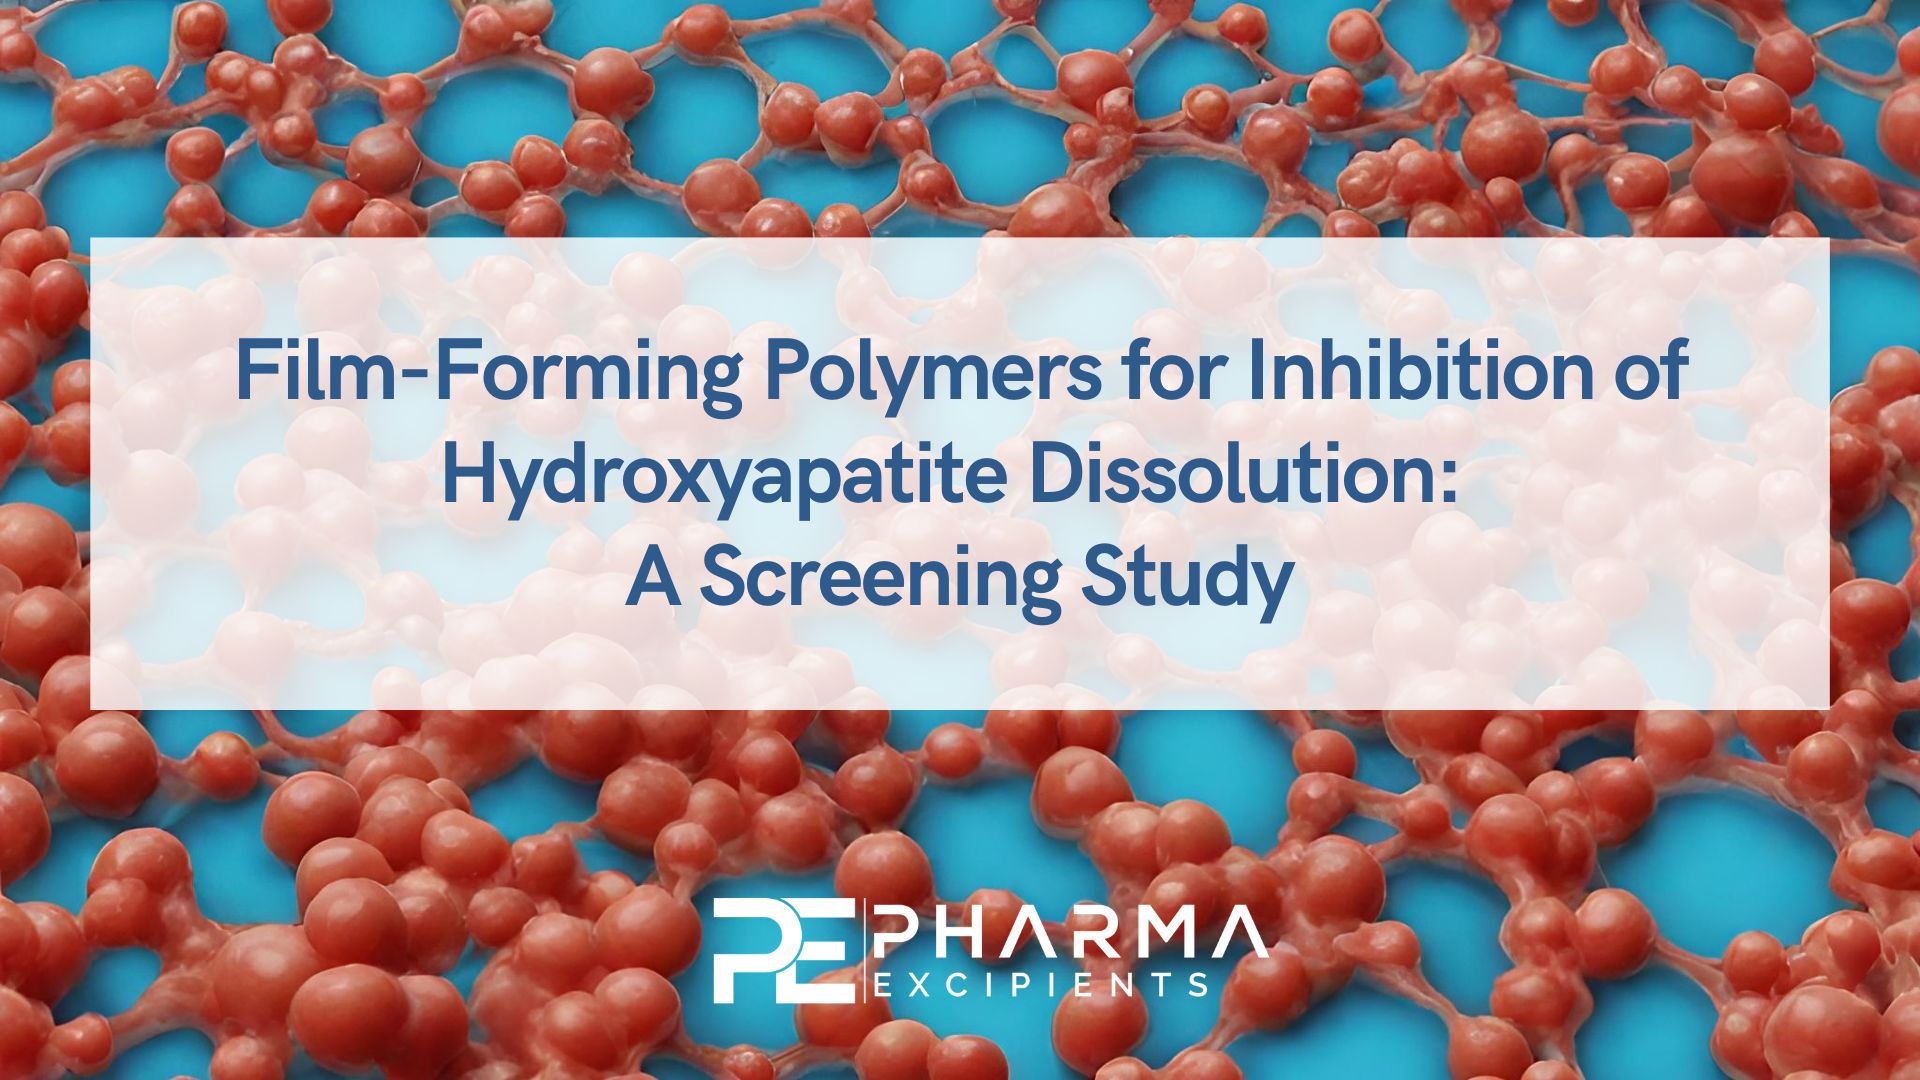 Film-Forming Polymers for Inhibition of Hydroxyapatite Dissolution: A Screening Study